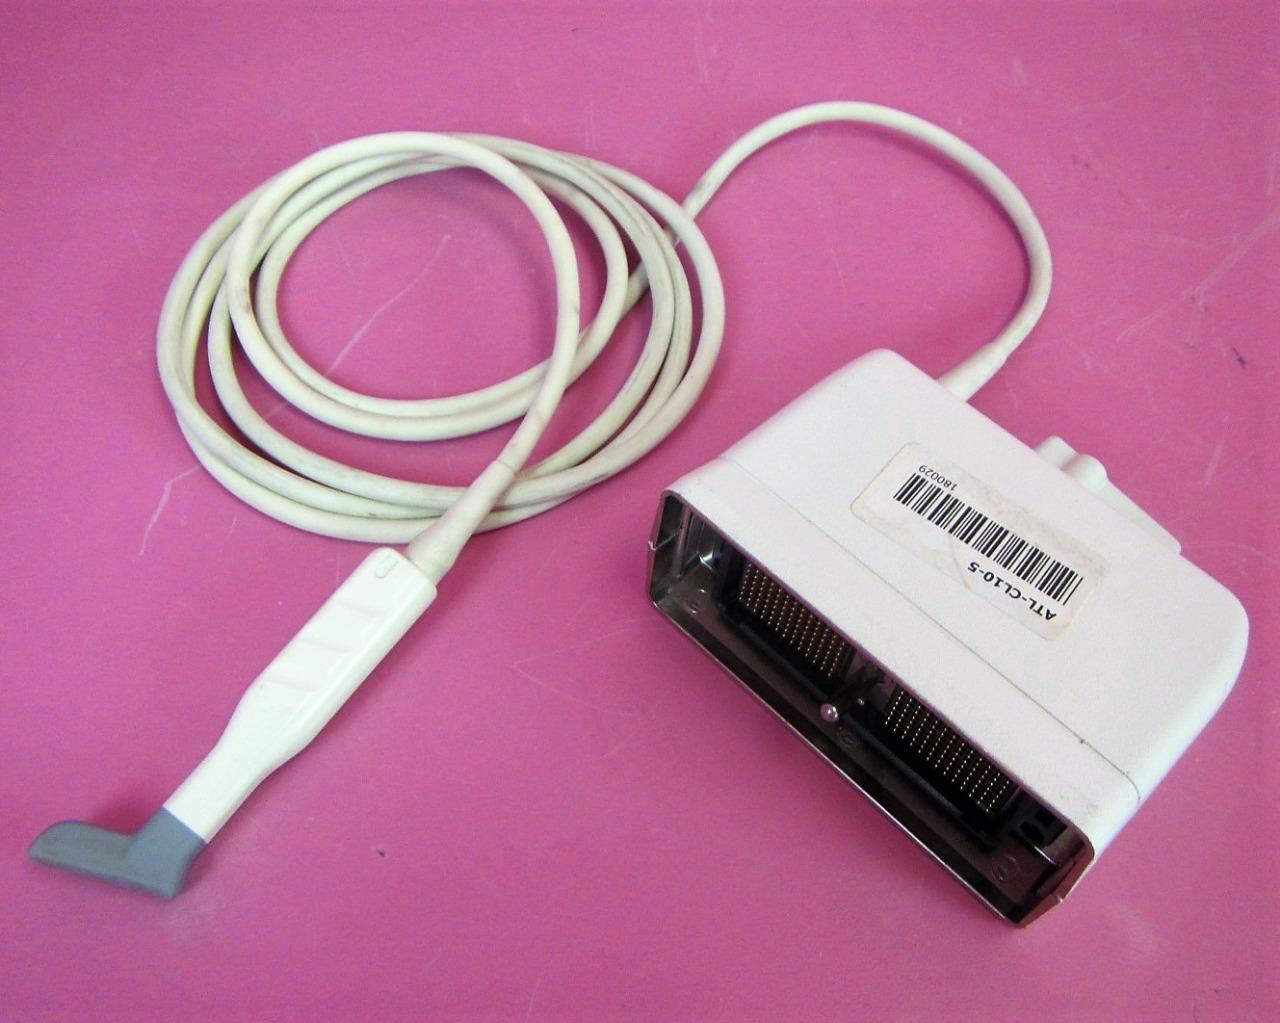 CL 10-5 ATL Compact Linnear Array 23mm Ultrasound Probe Transducer for Phillips DIAGNOSTIC ULTRASOUND MACHINES FOR SALE